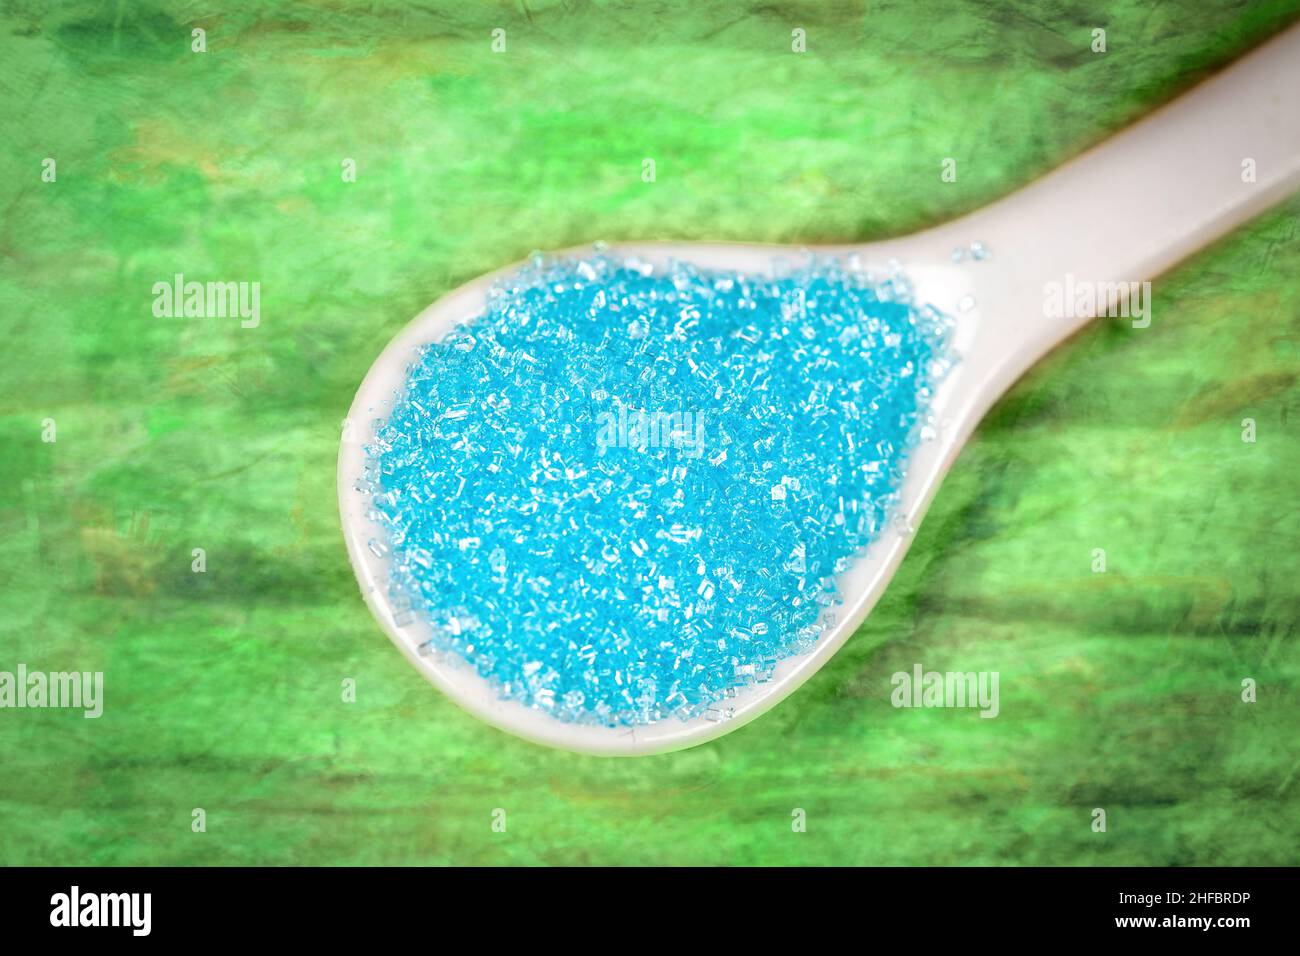 Confectionary turquoise sugar in a white spoon Stock Photo